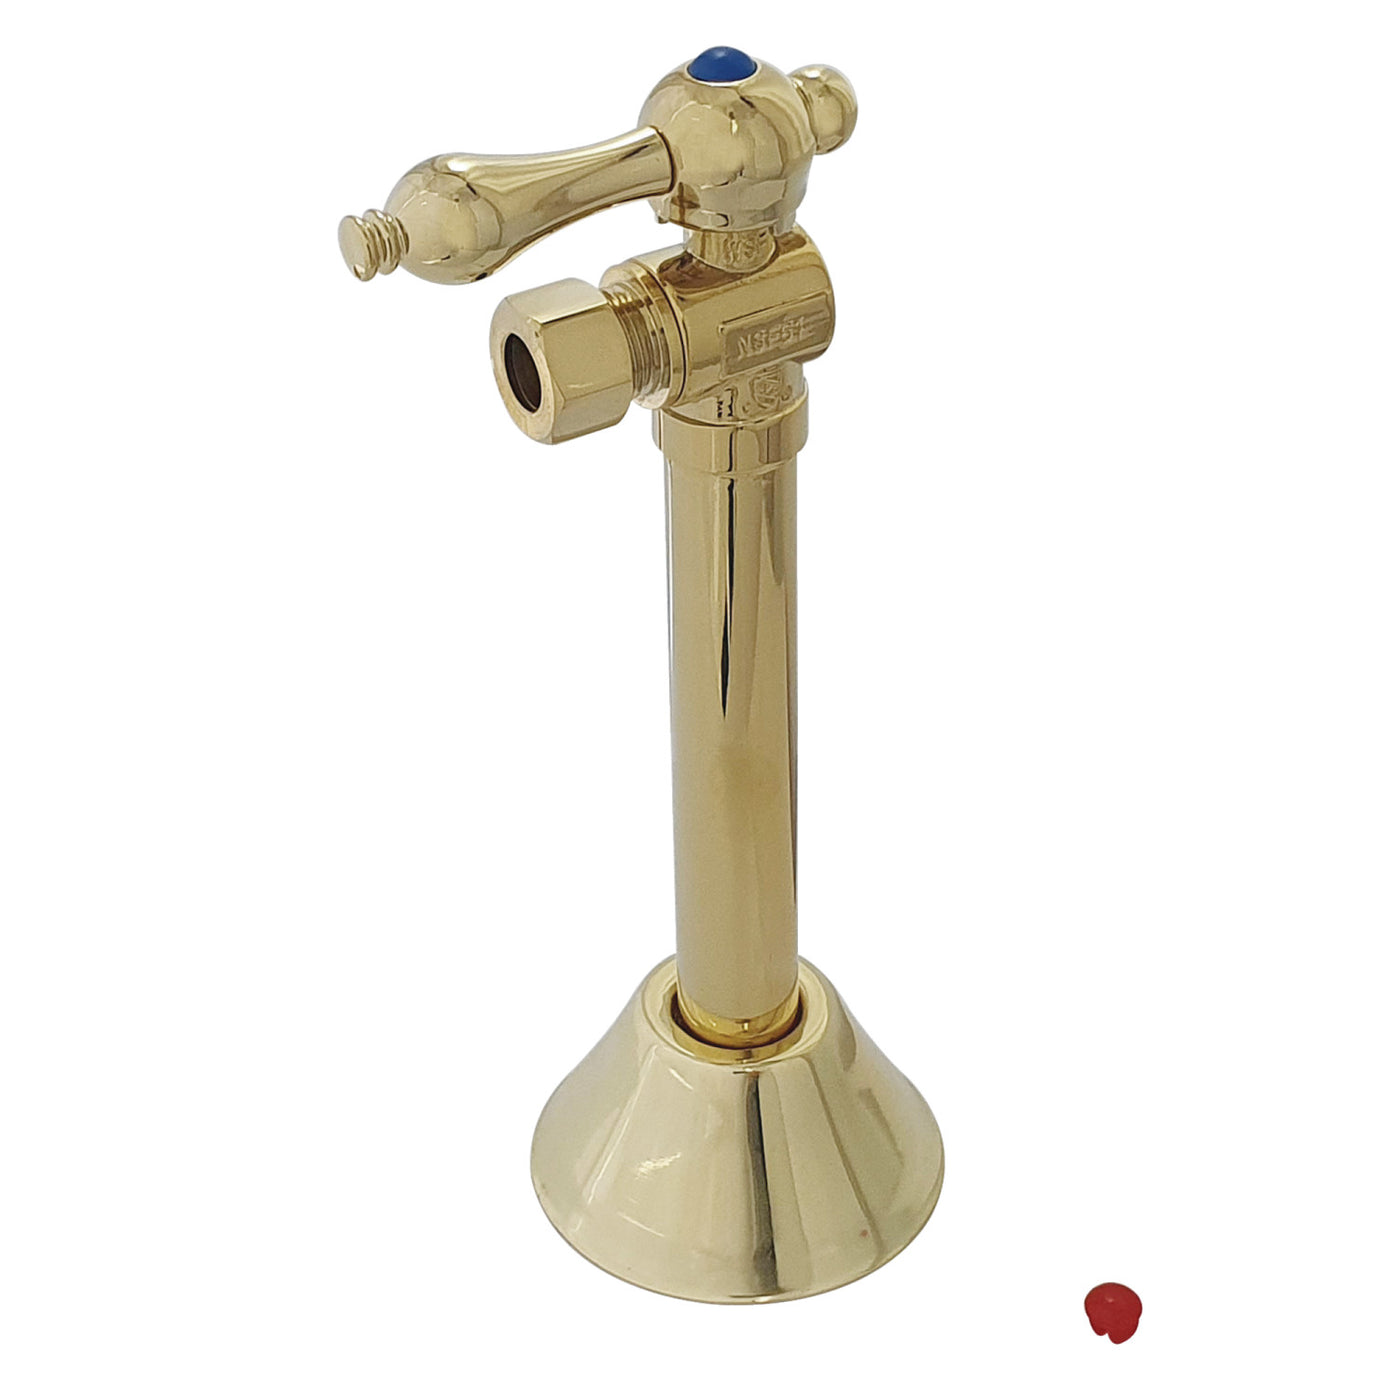 Elements of Design ECC83202 1/2" Sweat x 3/8" OD Comp Angle Shut Off Valve with 5" Extension, Polished Brass